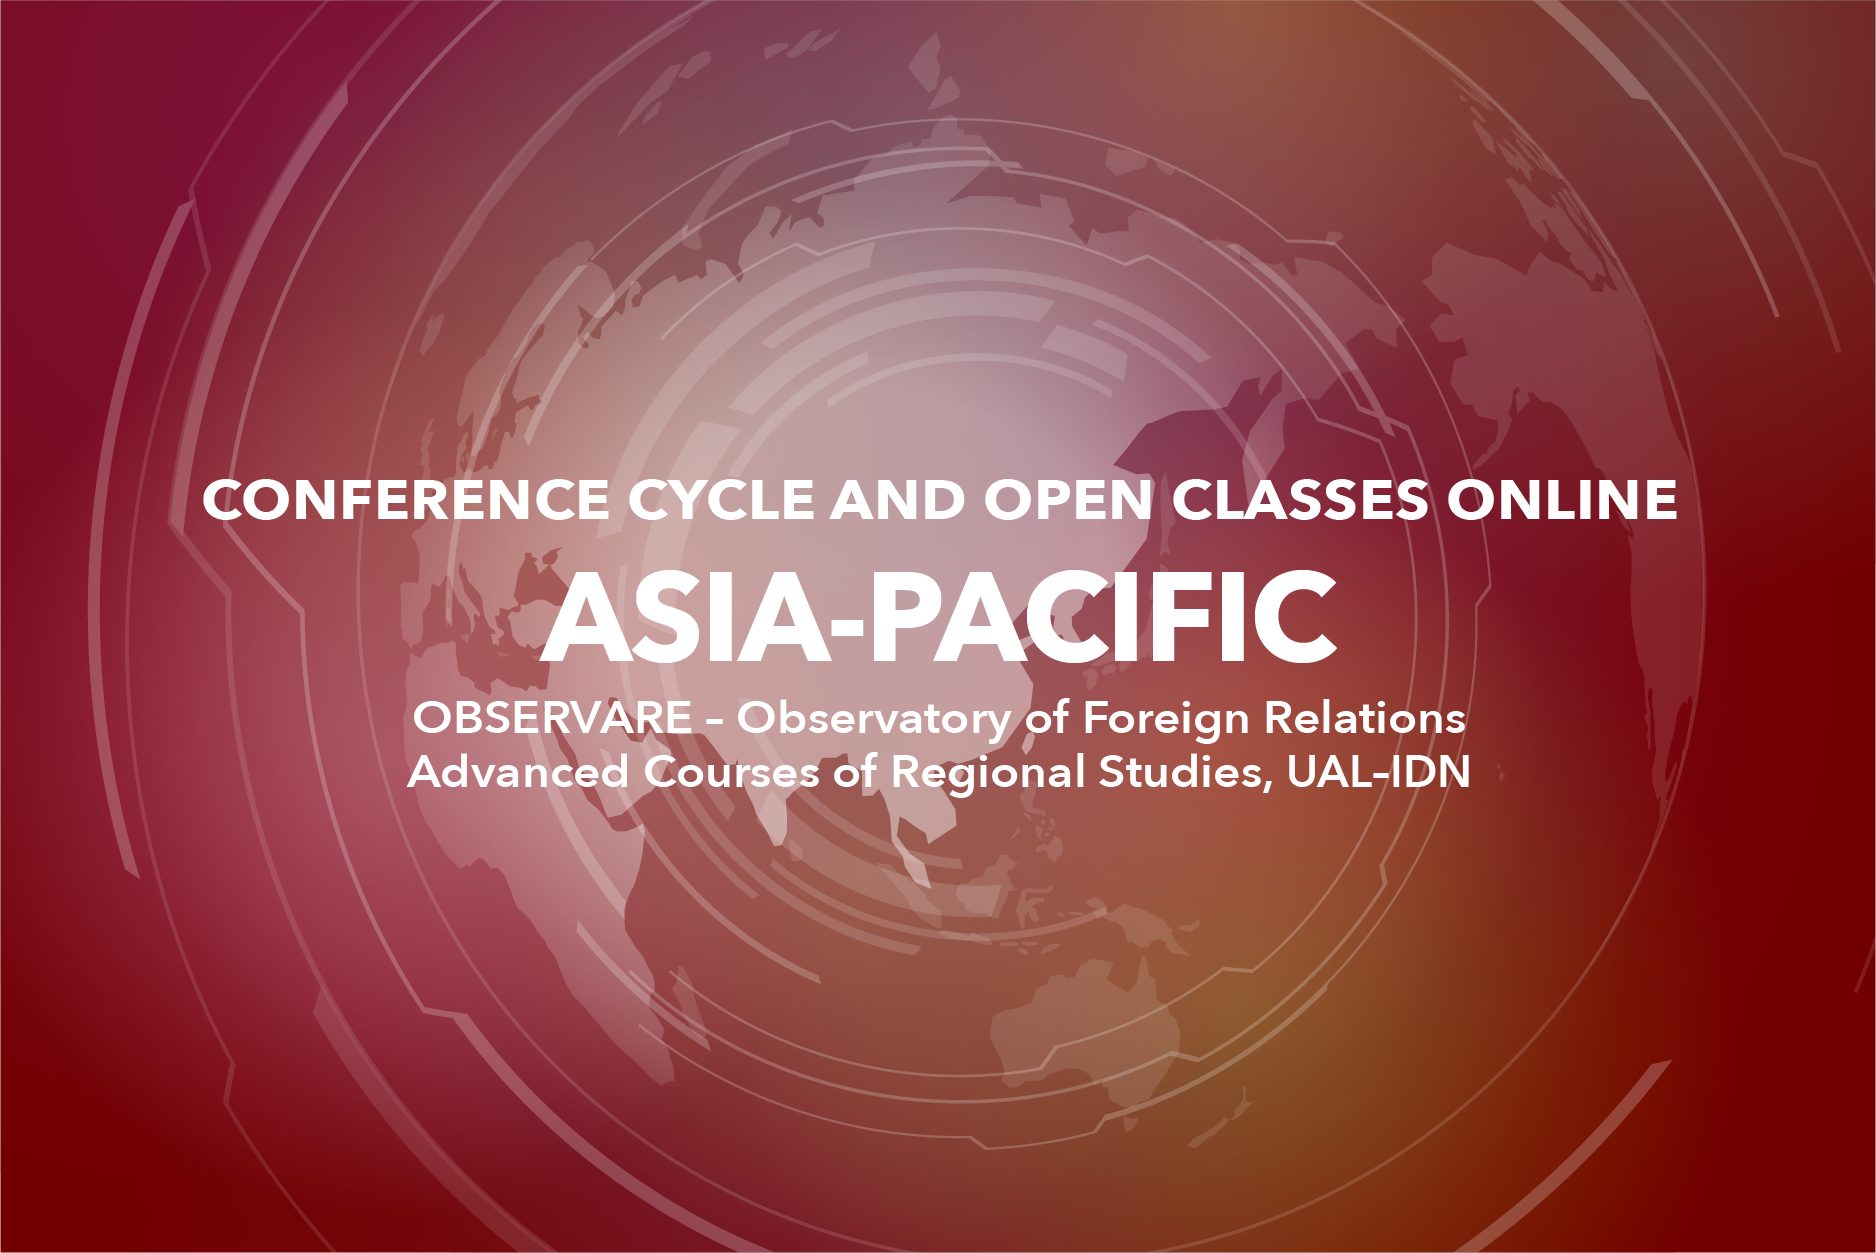 “ASIA-PACIFIC” – CONFERENCE CYCLE AND OPEN CLASSES 2022 | UAL-IDN